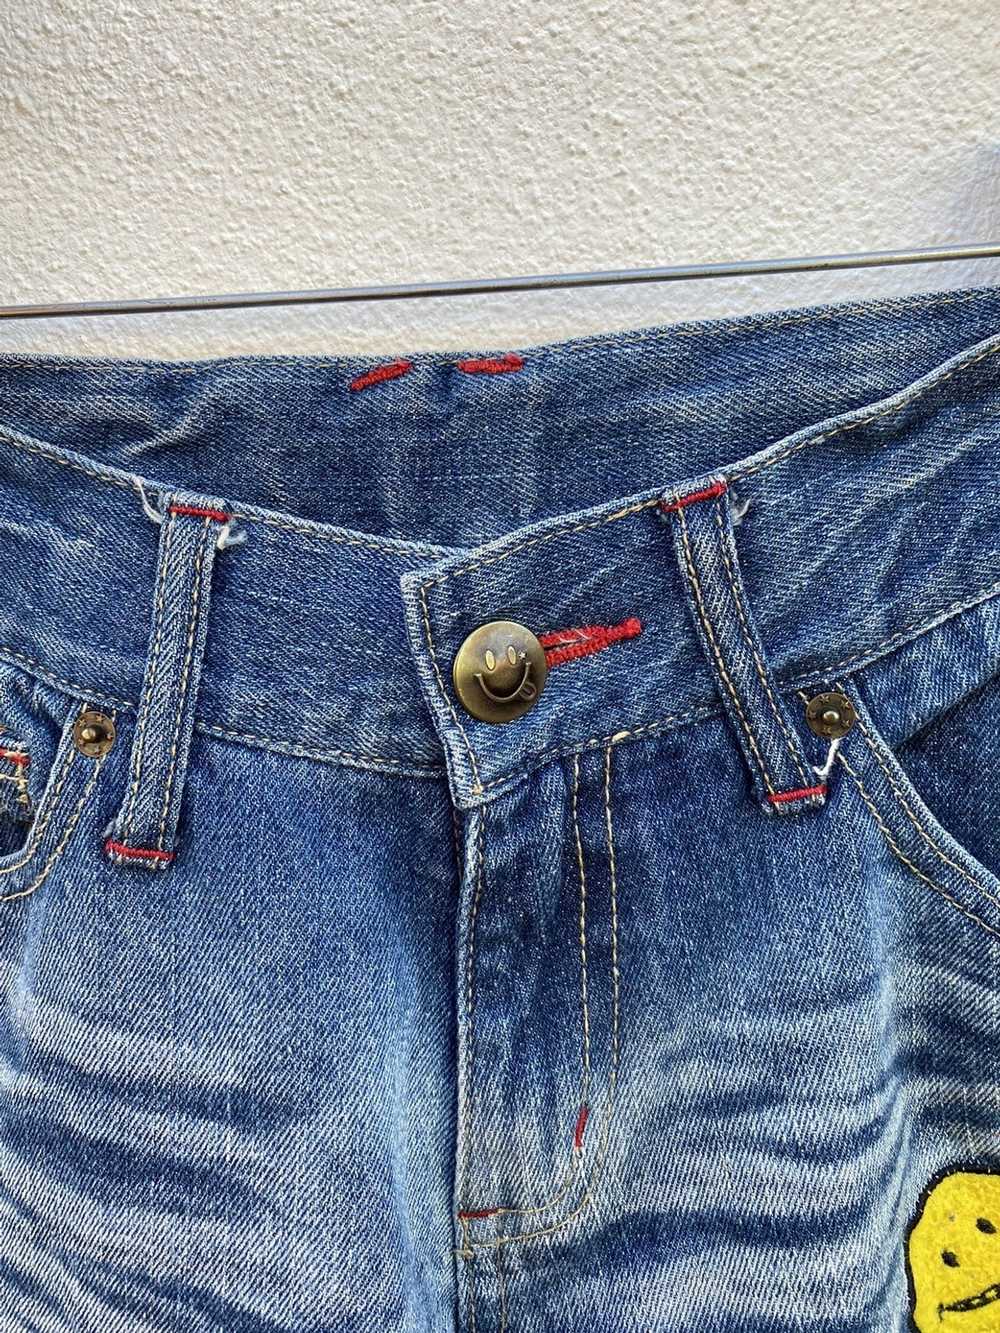 Japanese Brand Smiley Face Jeans - image 5